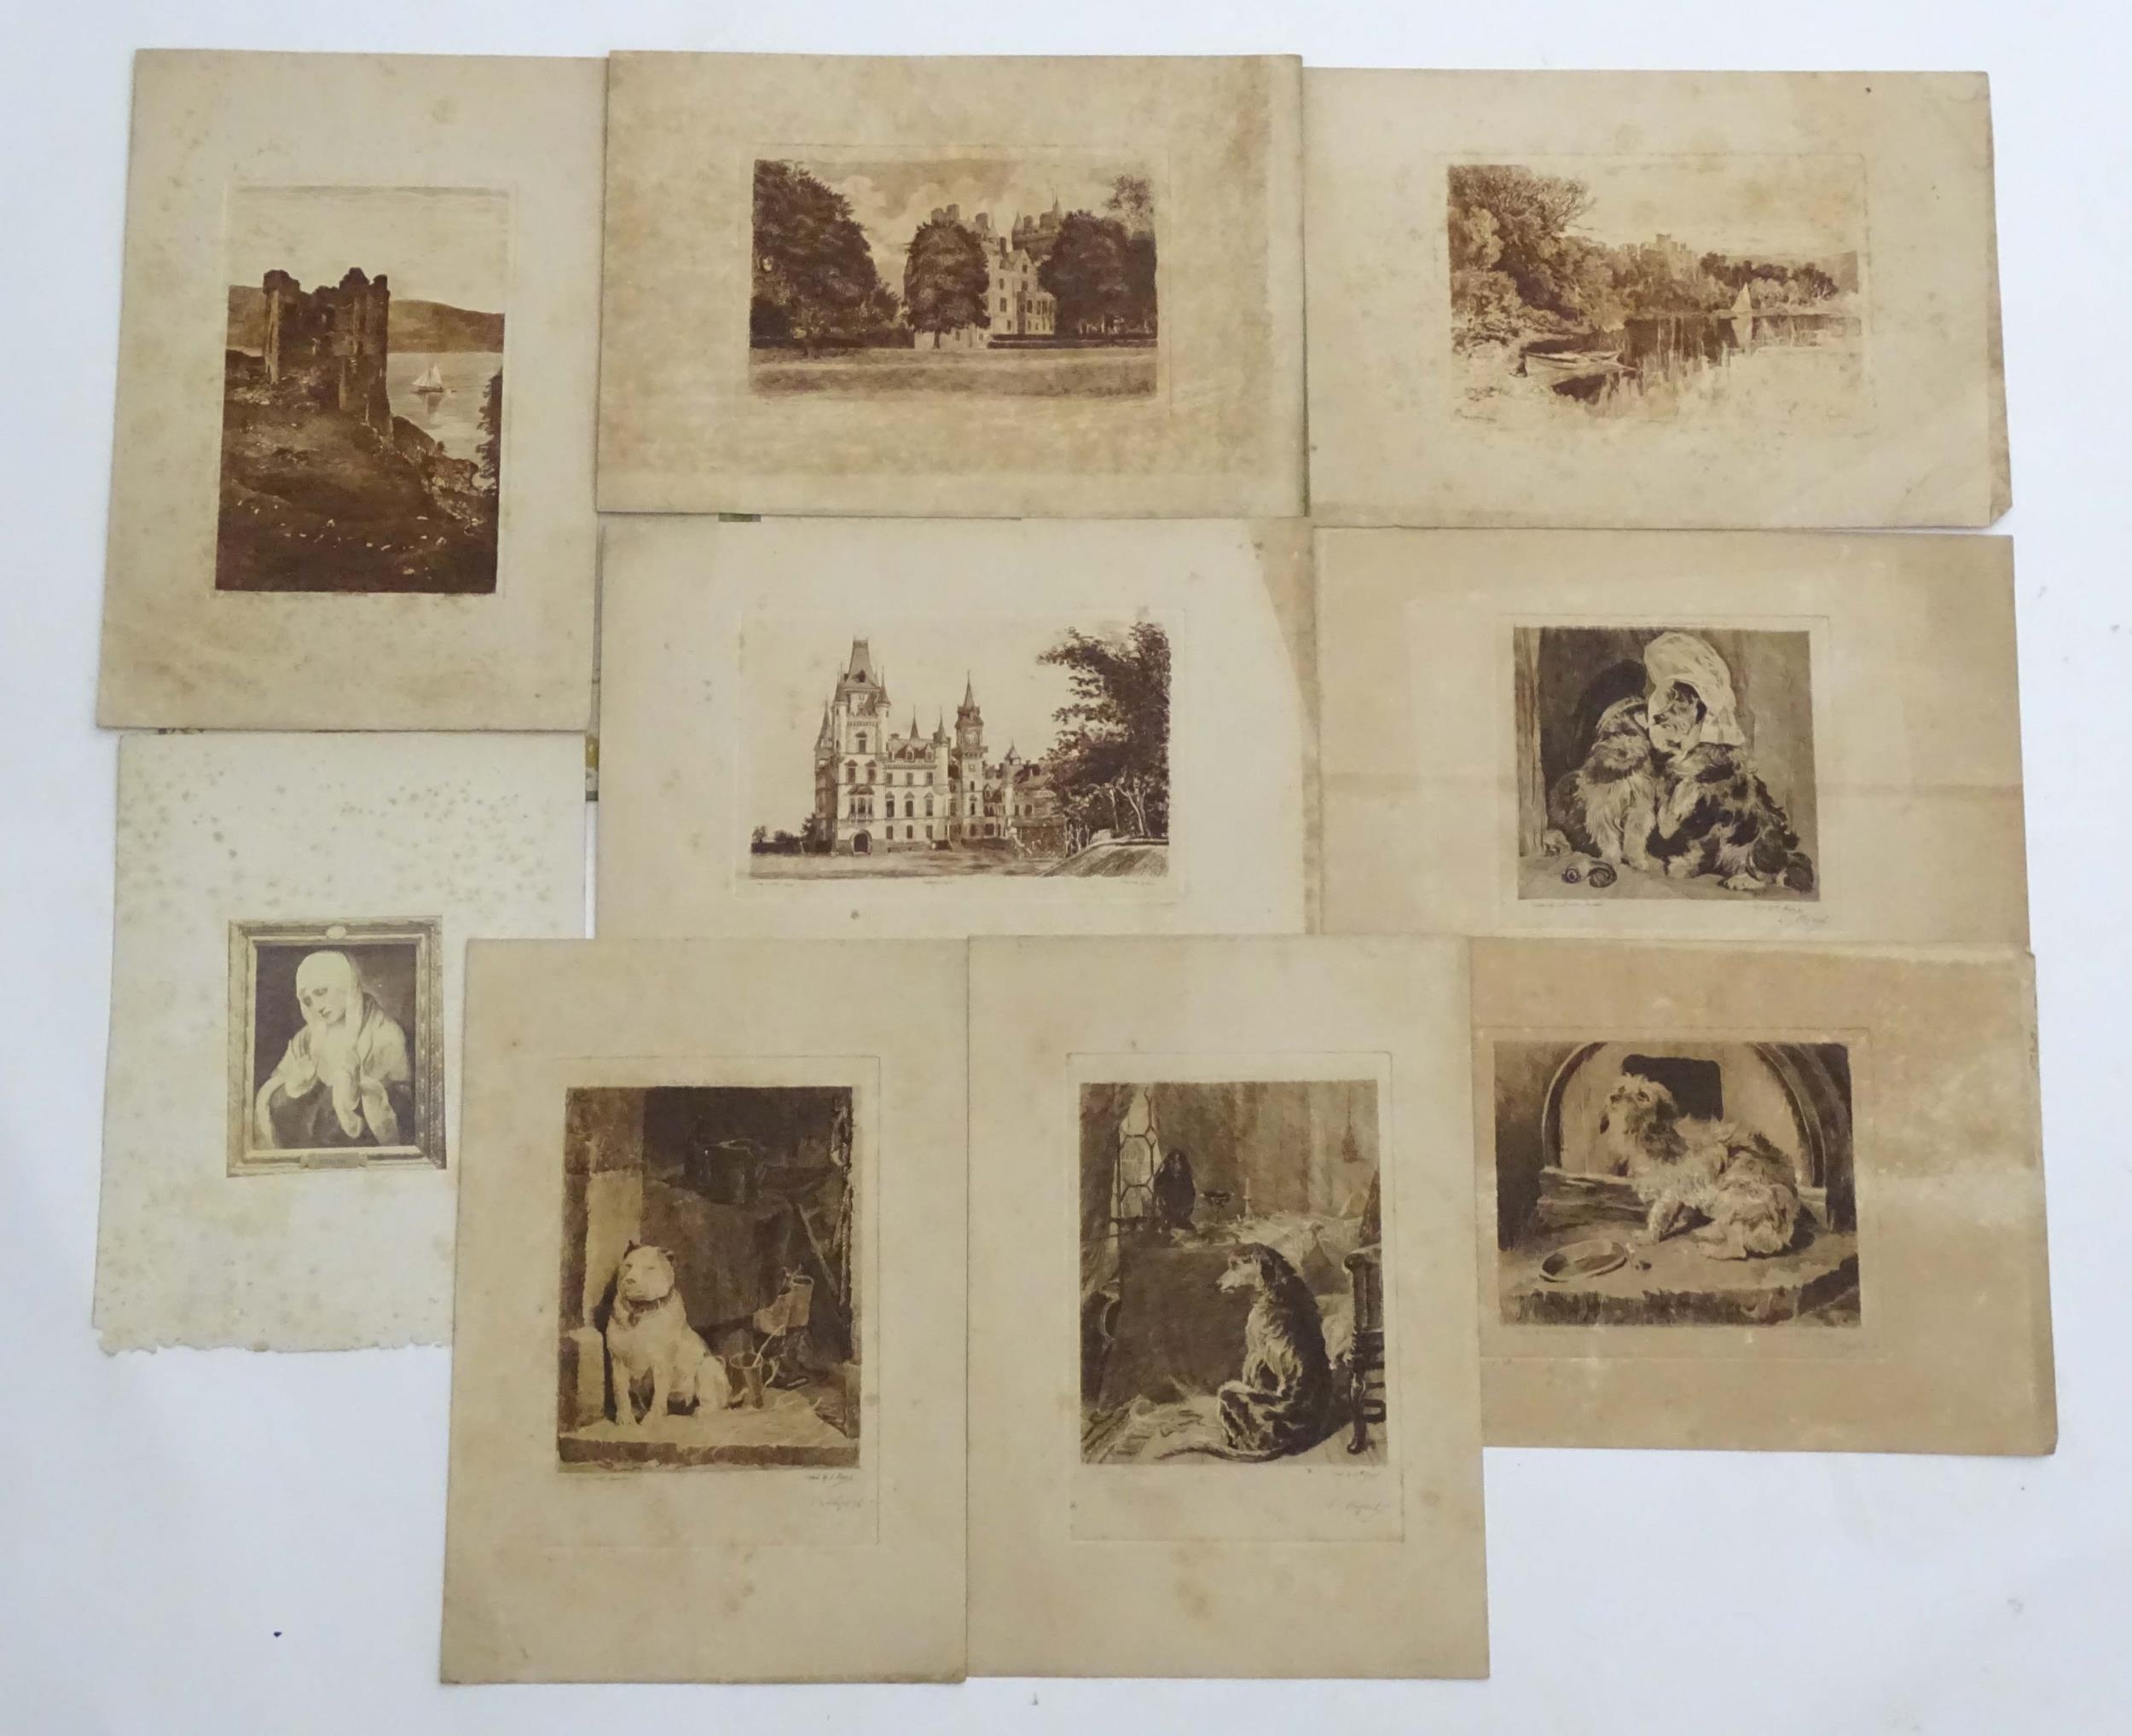 S. Myers after Sir Edwin Henry Landseer (1807-1873), 19th century, Four etchings depicting dogs to - Image 5 of 20